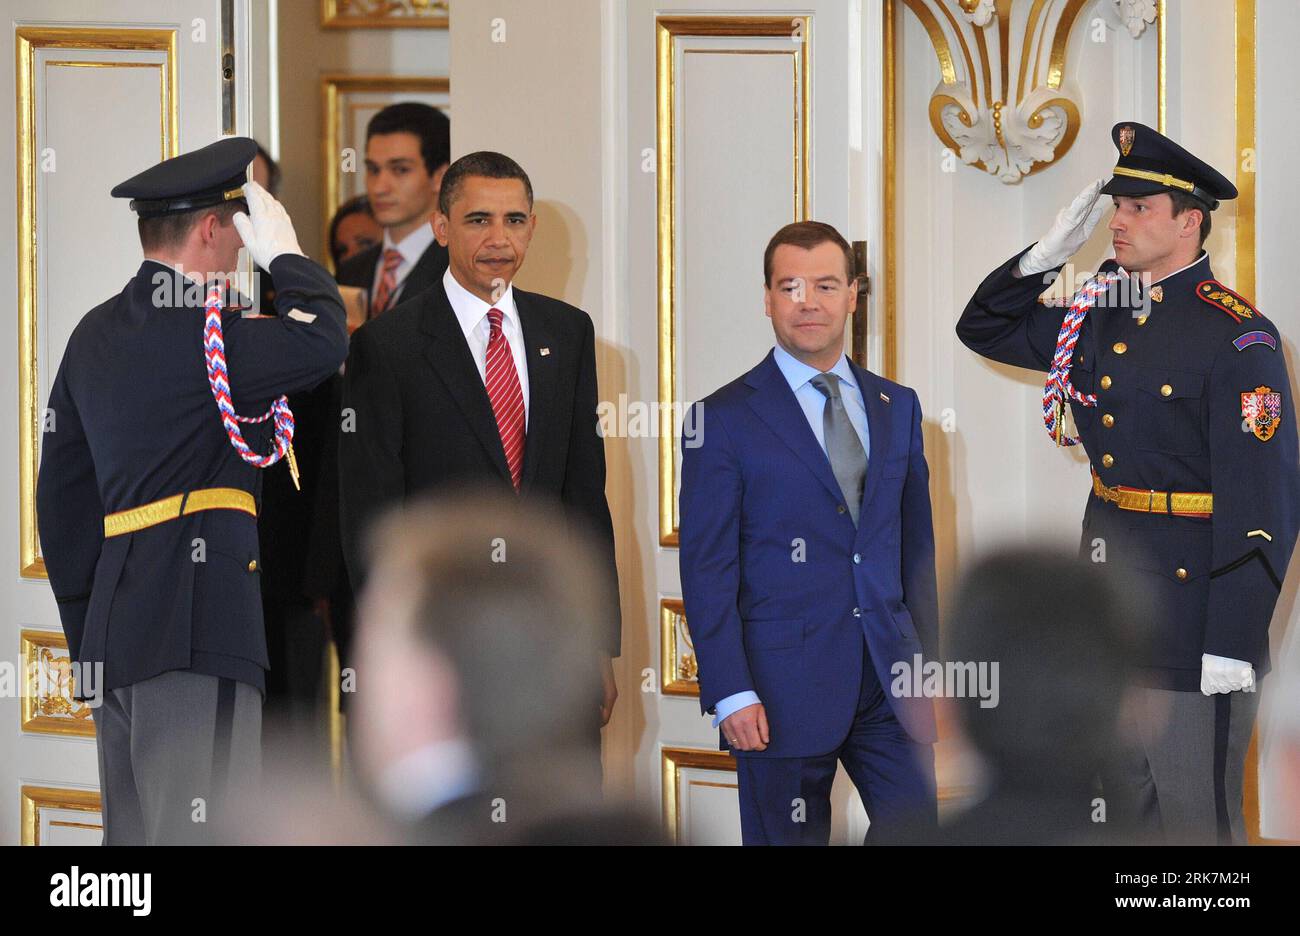 Bildnummer: 53927166  Datum: 08.04.2010  Copyright: imago/Xinhua (100408) -- PRAGUE, April 8, 2010 (Xinhua) -- U.S. President Barack Obama (L) and his Russian counterpart Dmitry Medvedev prepare to sign a landmark nuclear arms reduction treaty in Prague, capital of Czech Republic, on April 8, 2010. Under the new pact, the two countries agreed to reduce their deployed nuclear warheads to 1,550 each, or 30 percent below the current level of 2,200, and cut the launchers below 700 each.(Xinhua/Wu Wei) (lyx) (13)CZECH-PRAGUE-RUSSIA-US-TREATY PUBLICATIONxNOTxINxCHN People Politik Prag Abrüstung Abrü Stock Photo